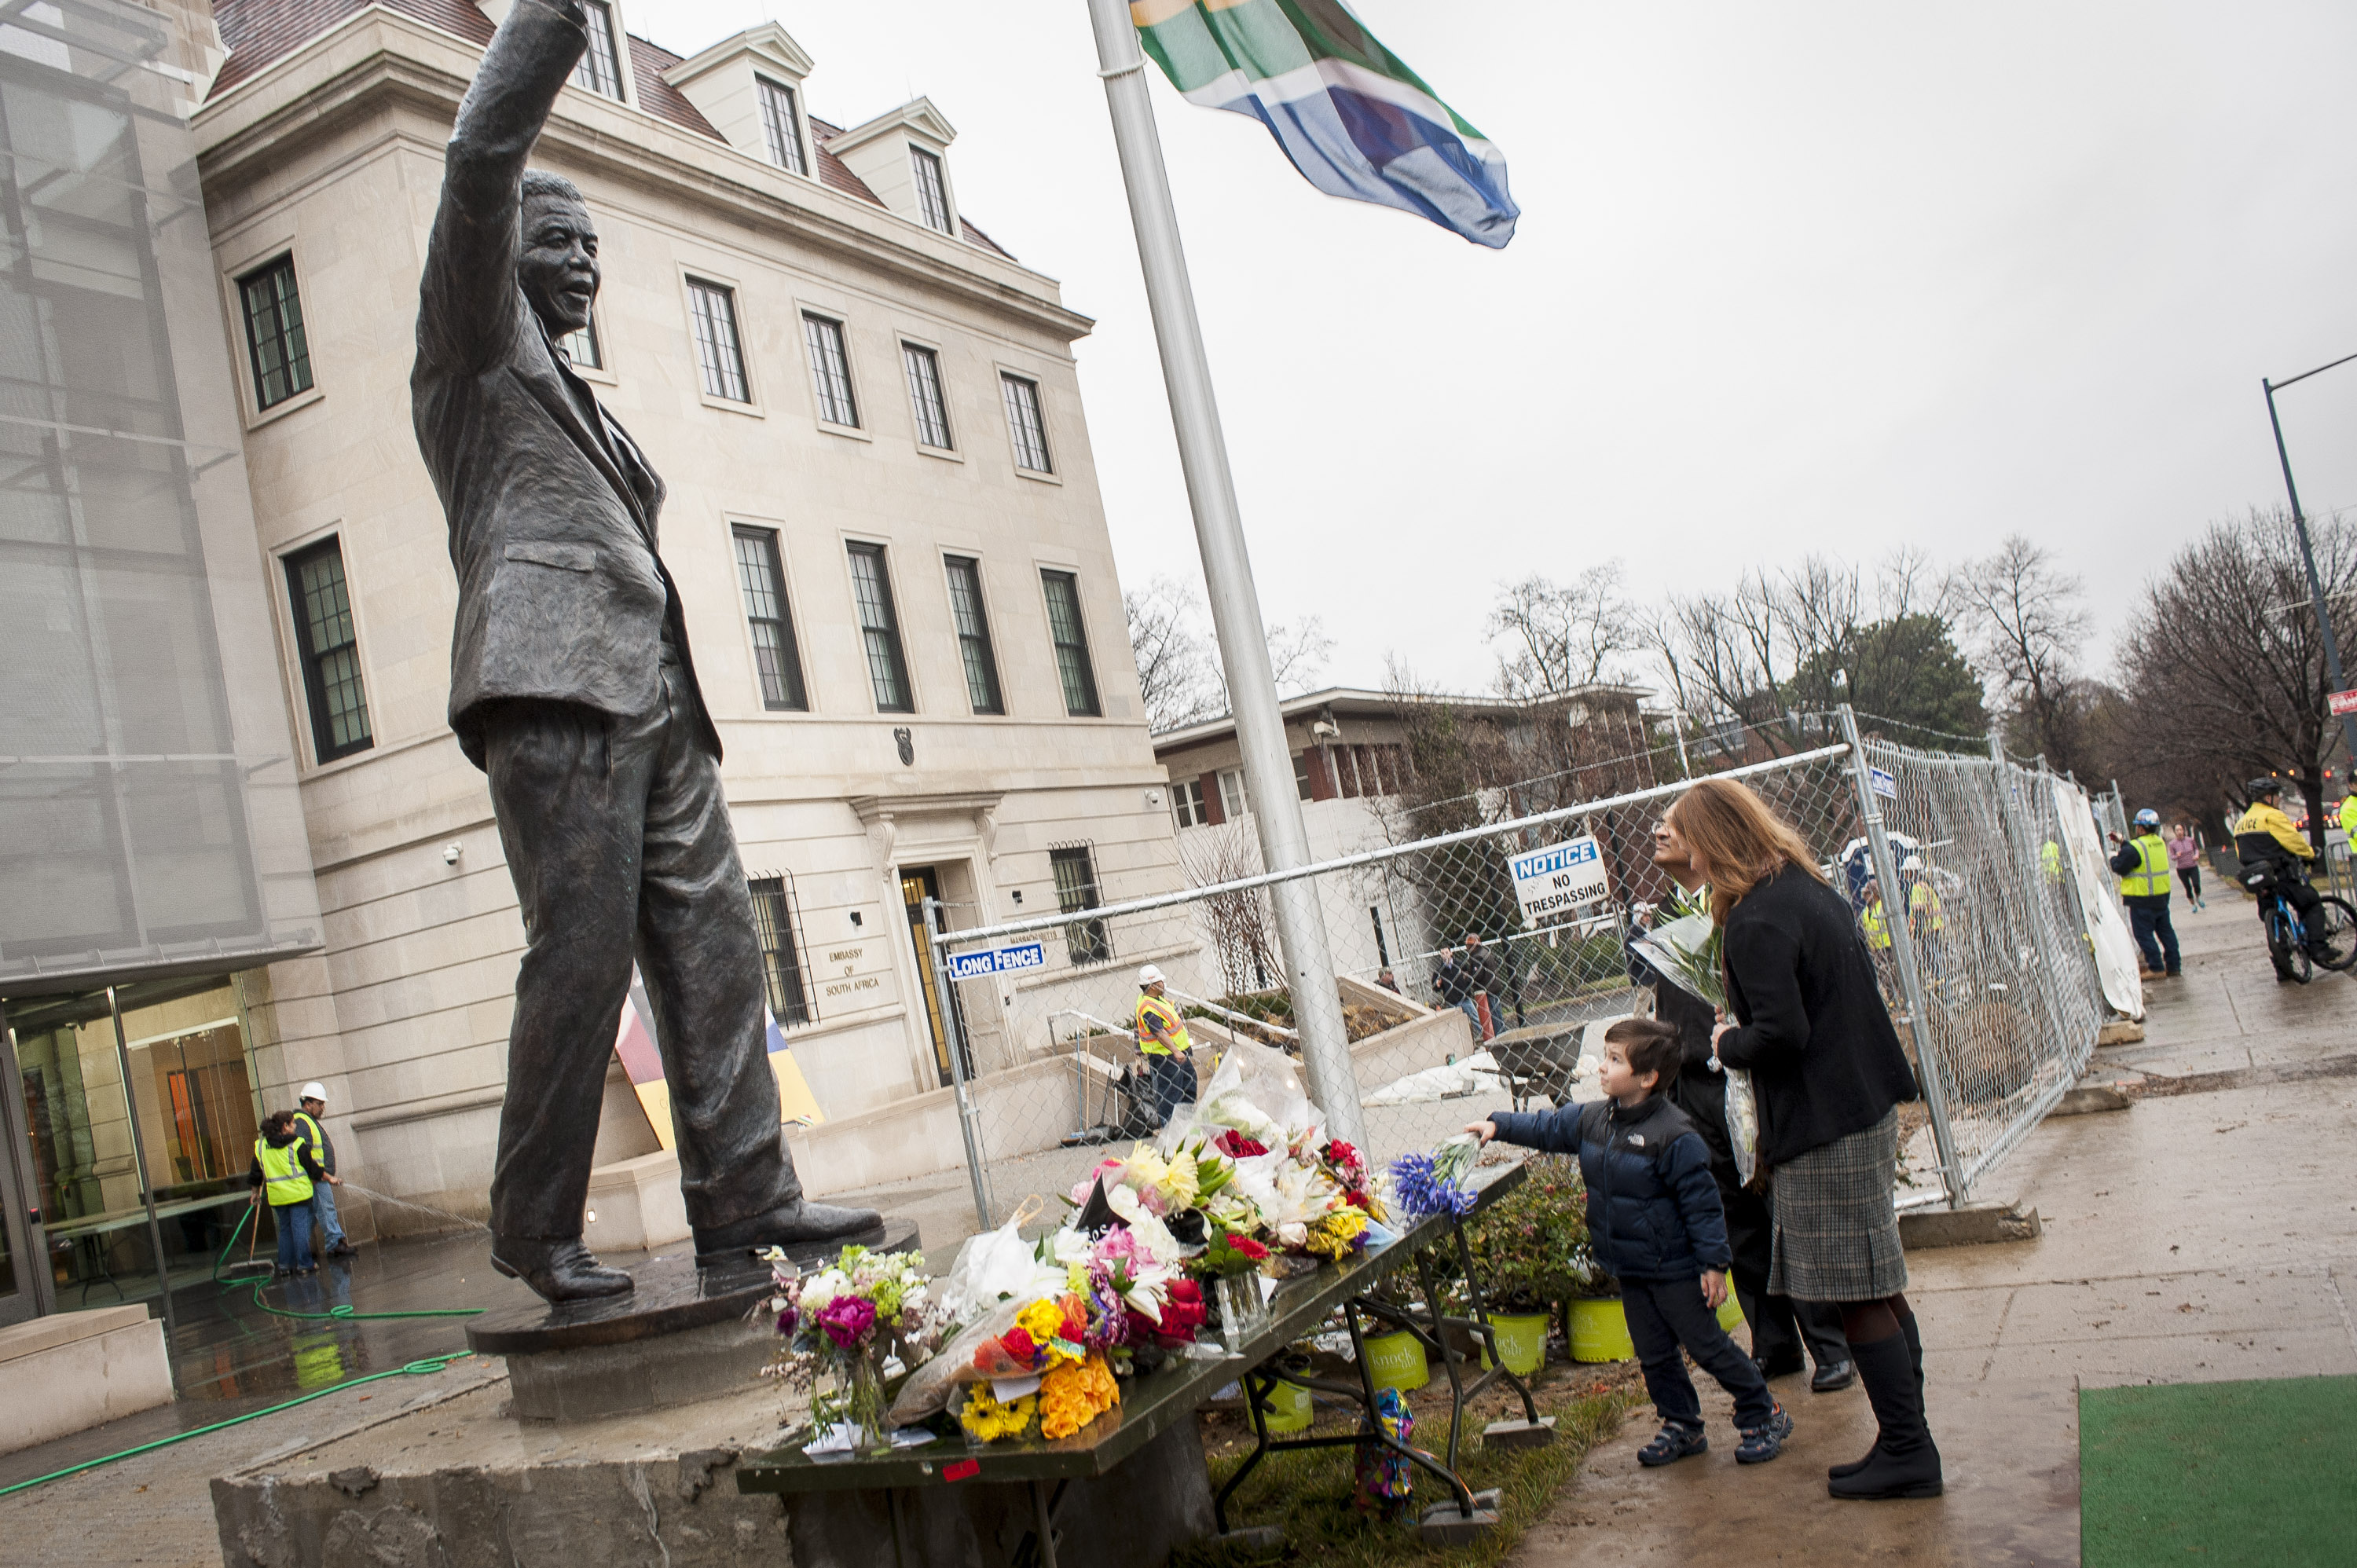 South African Embassy in D.C. Flooded With Visitors for Mandela « CBS DC